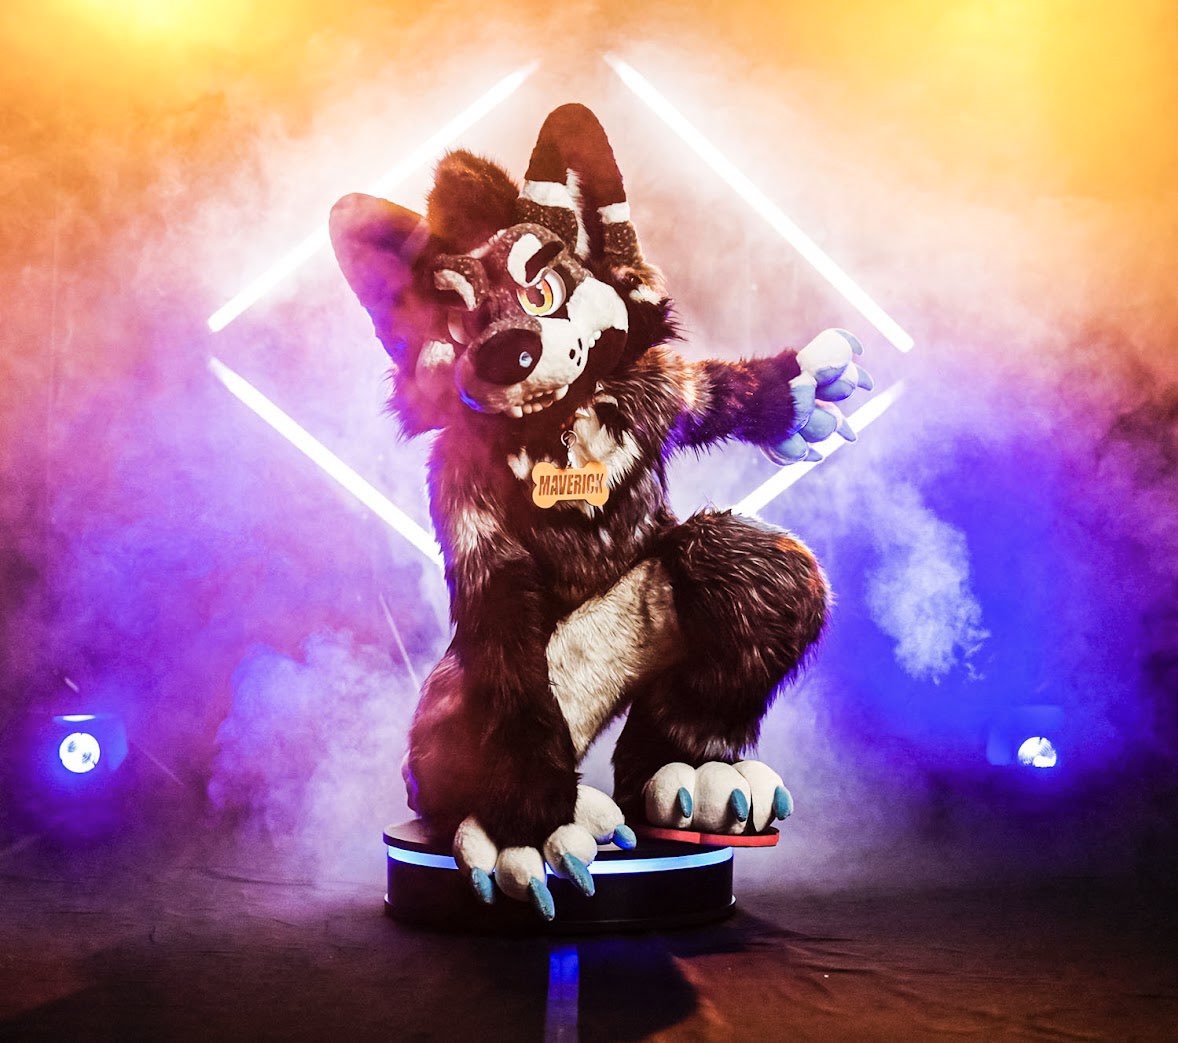 New stage unlocked Boss Fight! Wild Husky appears on stage! What will you select to fight this beast on this #fursuitfriday Stage & Photo taken by.: @SloAnime Thank for the team @SloAnime to set up this amazing and cool photo/video shoot at the Umiko con🩵🙌